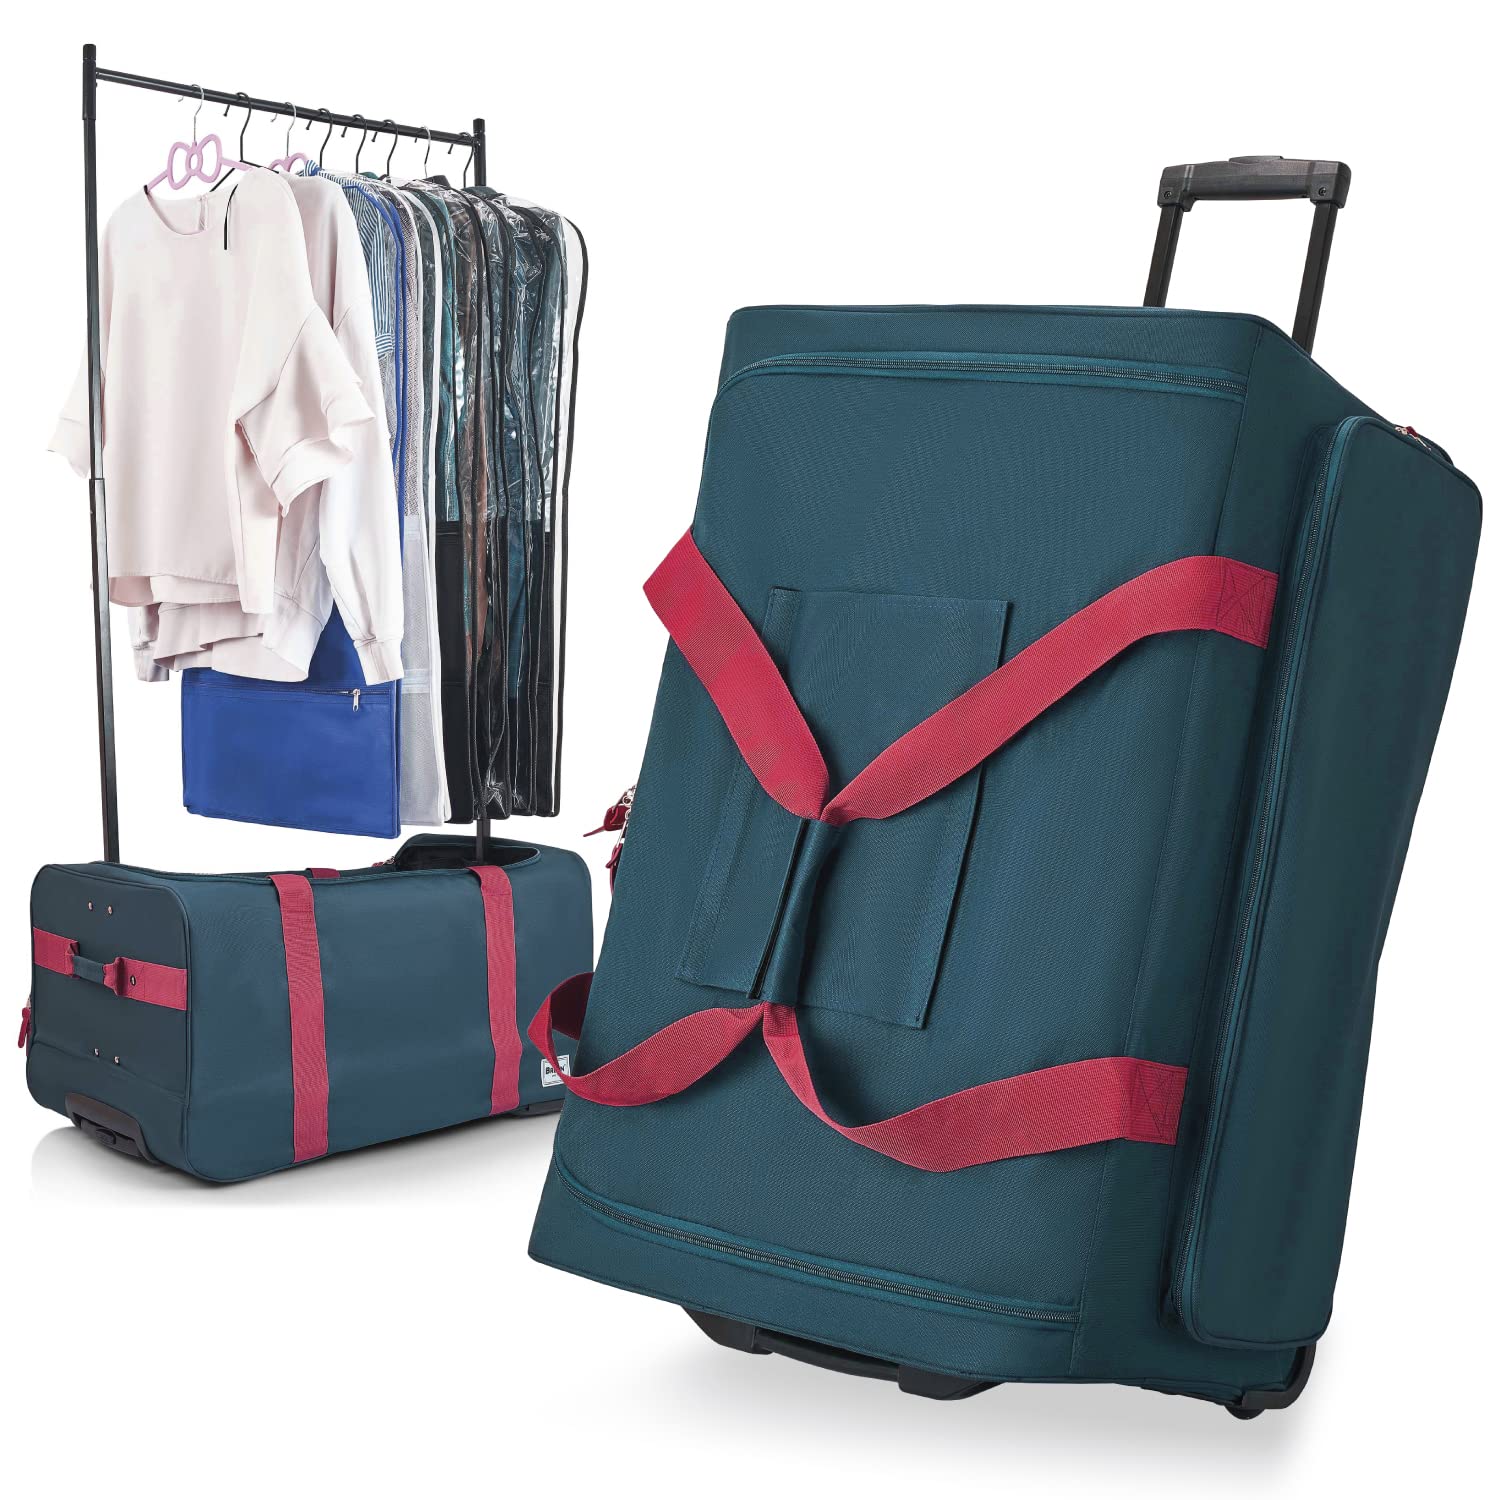 BRÜUN Dance Duffel Bag with Garment Rack and included Protective Cover – A 29" Large Teal Colored Dream Rolling Carrier with Wheels for Travel – Designed for Men, Women to Hang Clothes on Long Journey